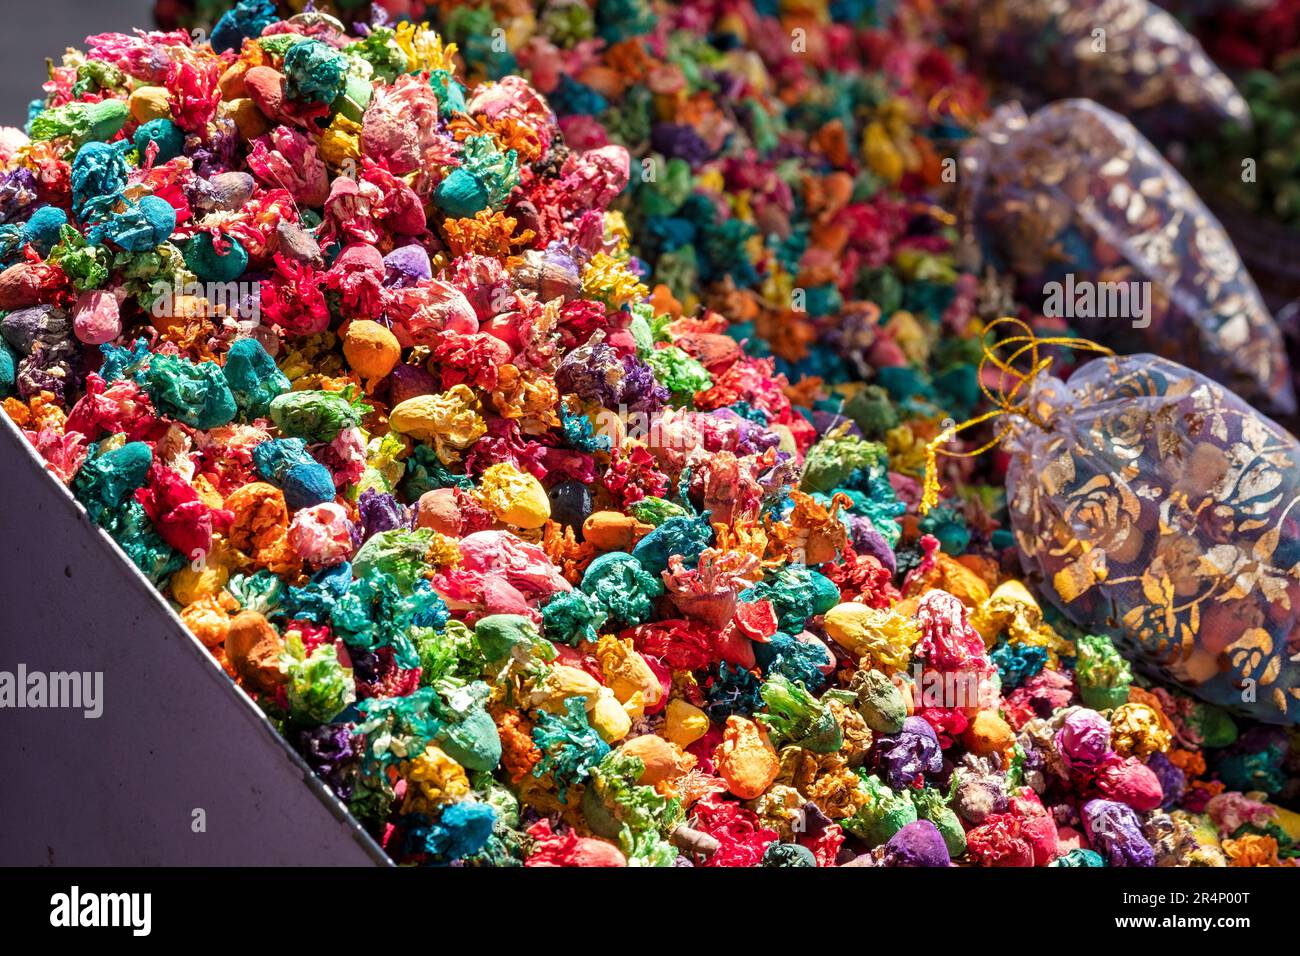 A close up image of sunlit heaped colourful dried flowerheads outside a herbal remedy souk in The Mellah Market, Marrakesh, Morocco. Stock Photo